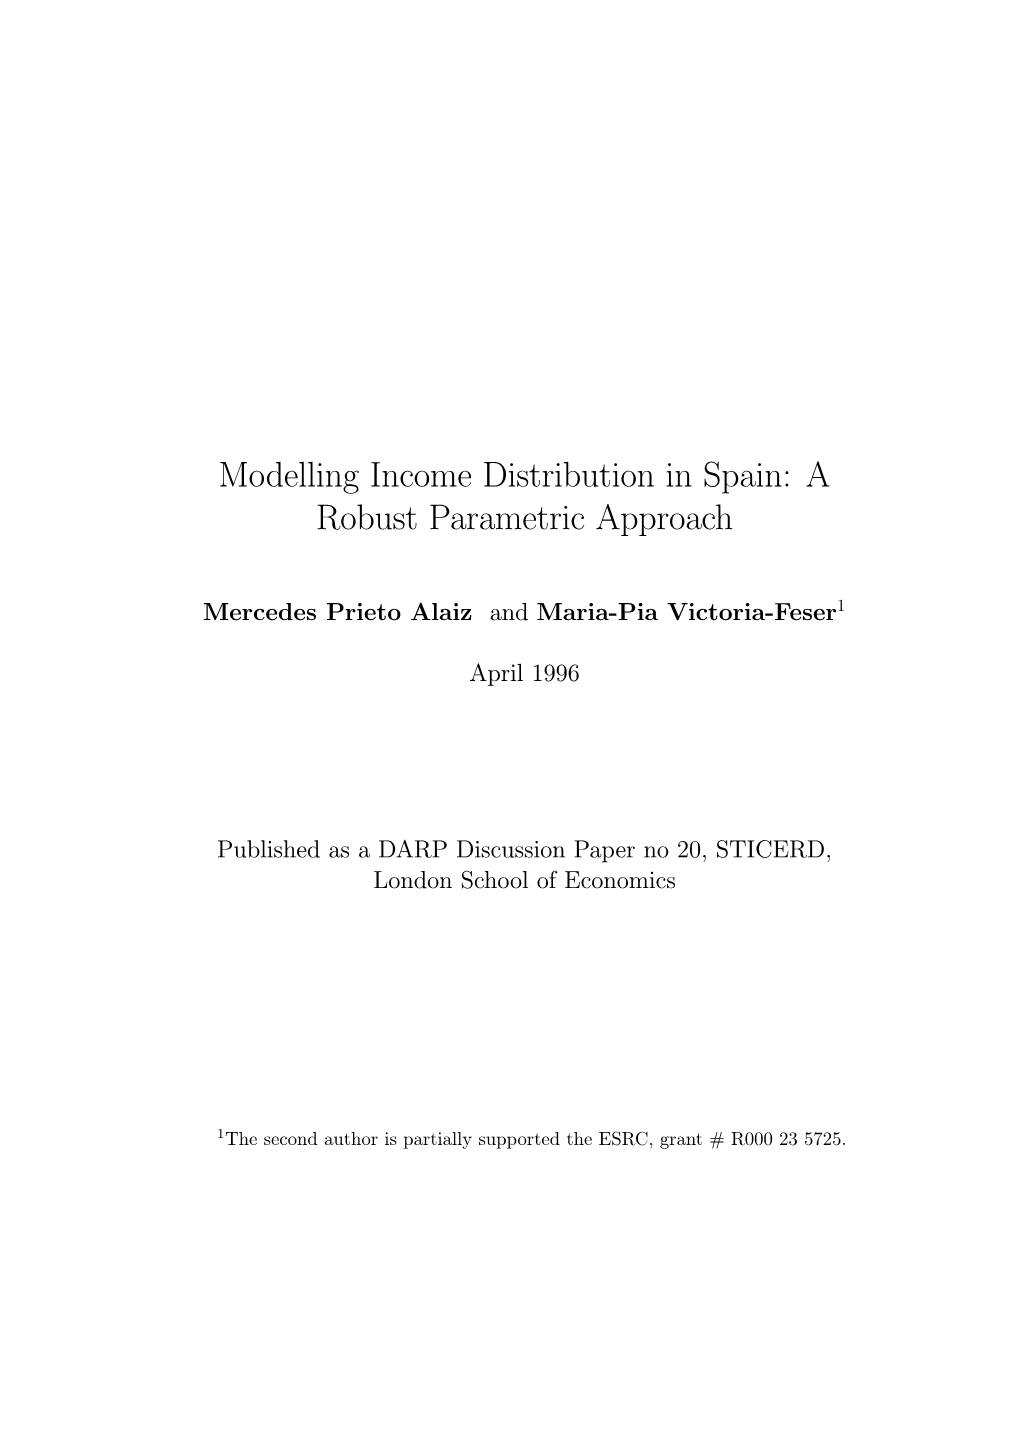 Modelling Income Distribution in Spain: a Robust Parametric Approach